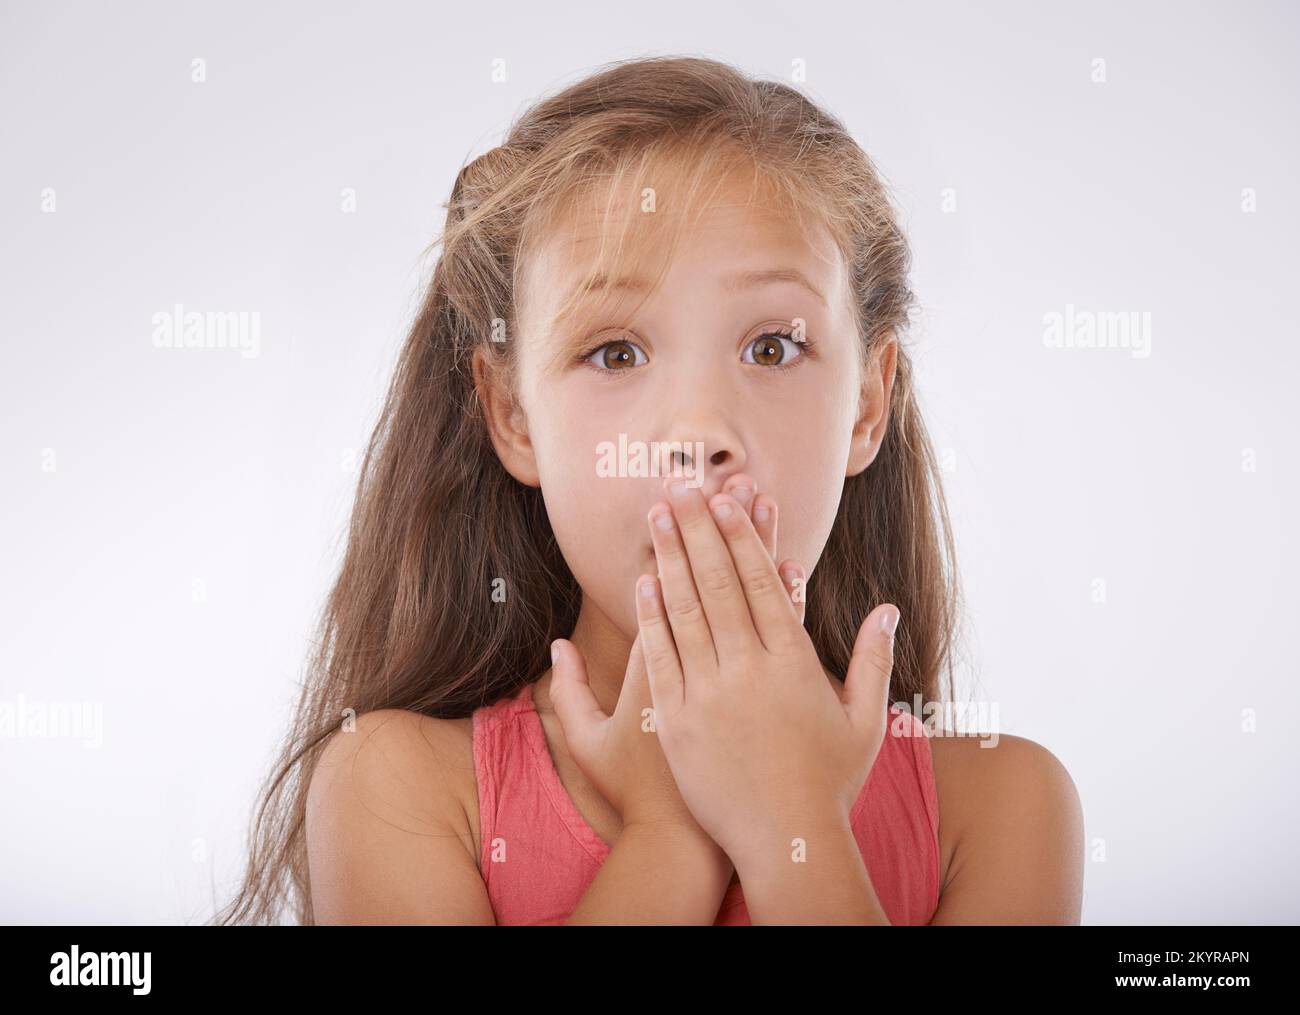 She cant believe it. Portrait of a little girl covering her mouth in disbelief. Stock Photo